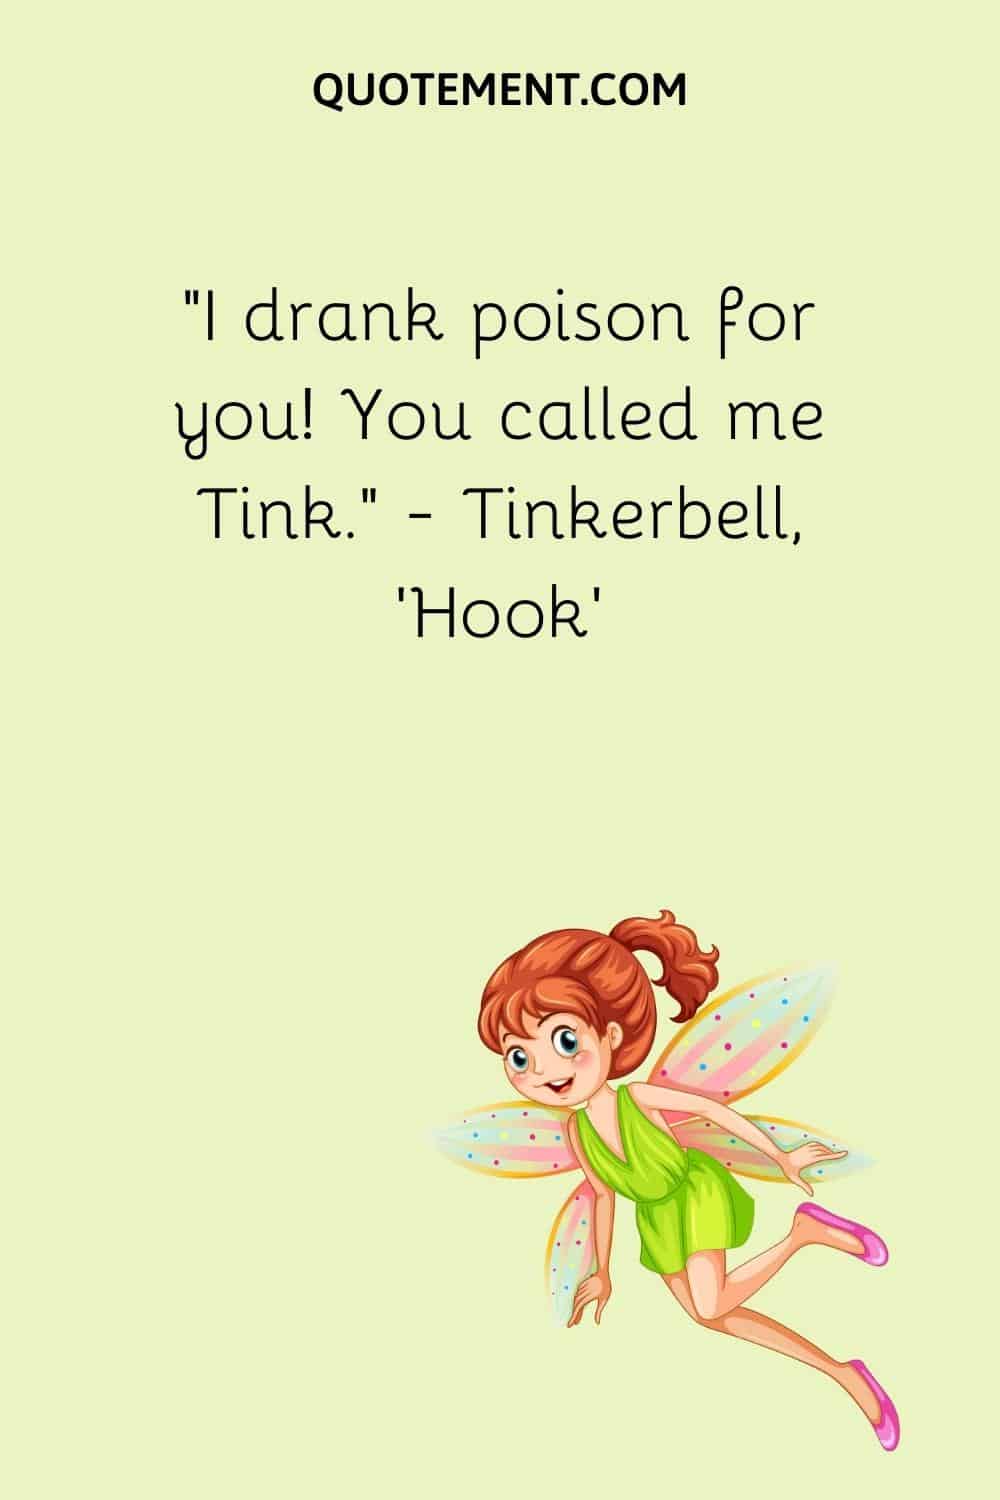 You called me Tink